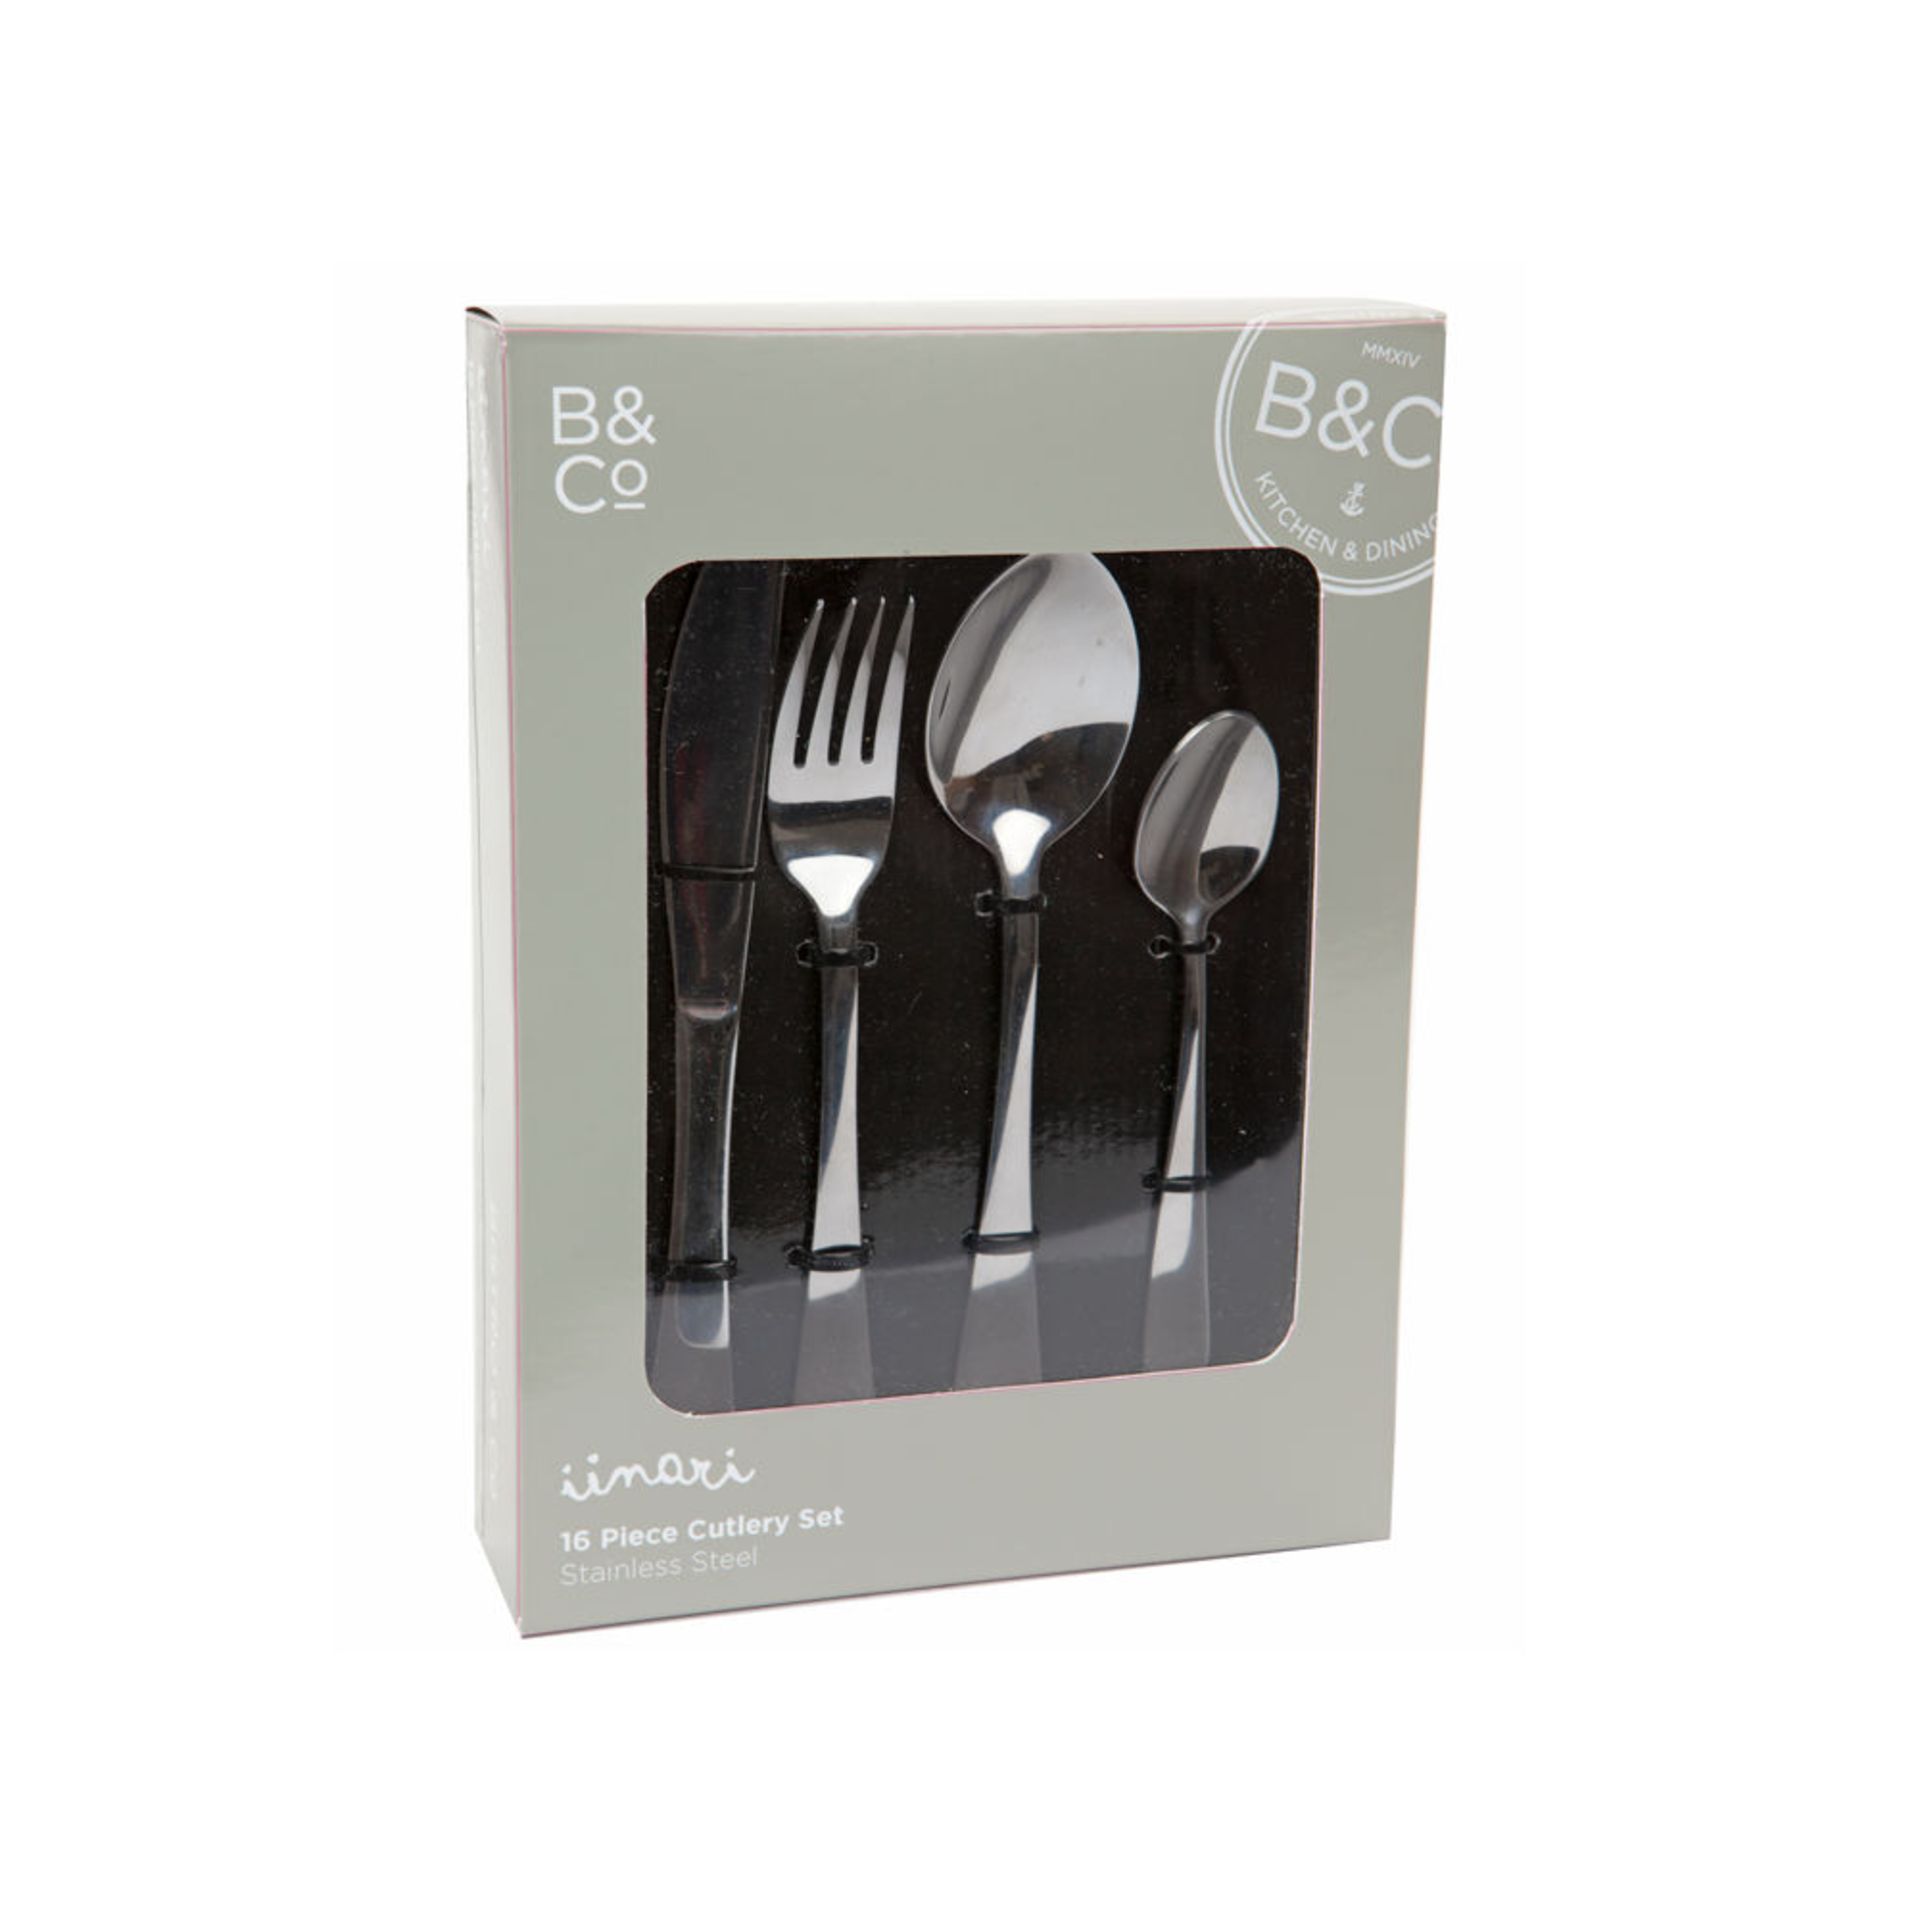 V *TRADE QTY* Brand New Bistro & Co Linari 16 Piece Stainless Steel Cutlery Set X 7 YOUR BID PRICE